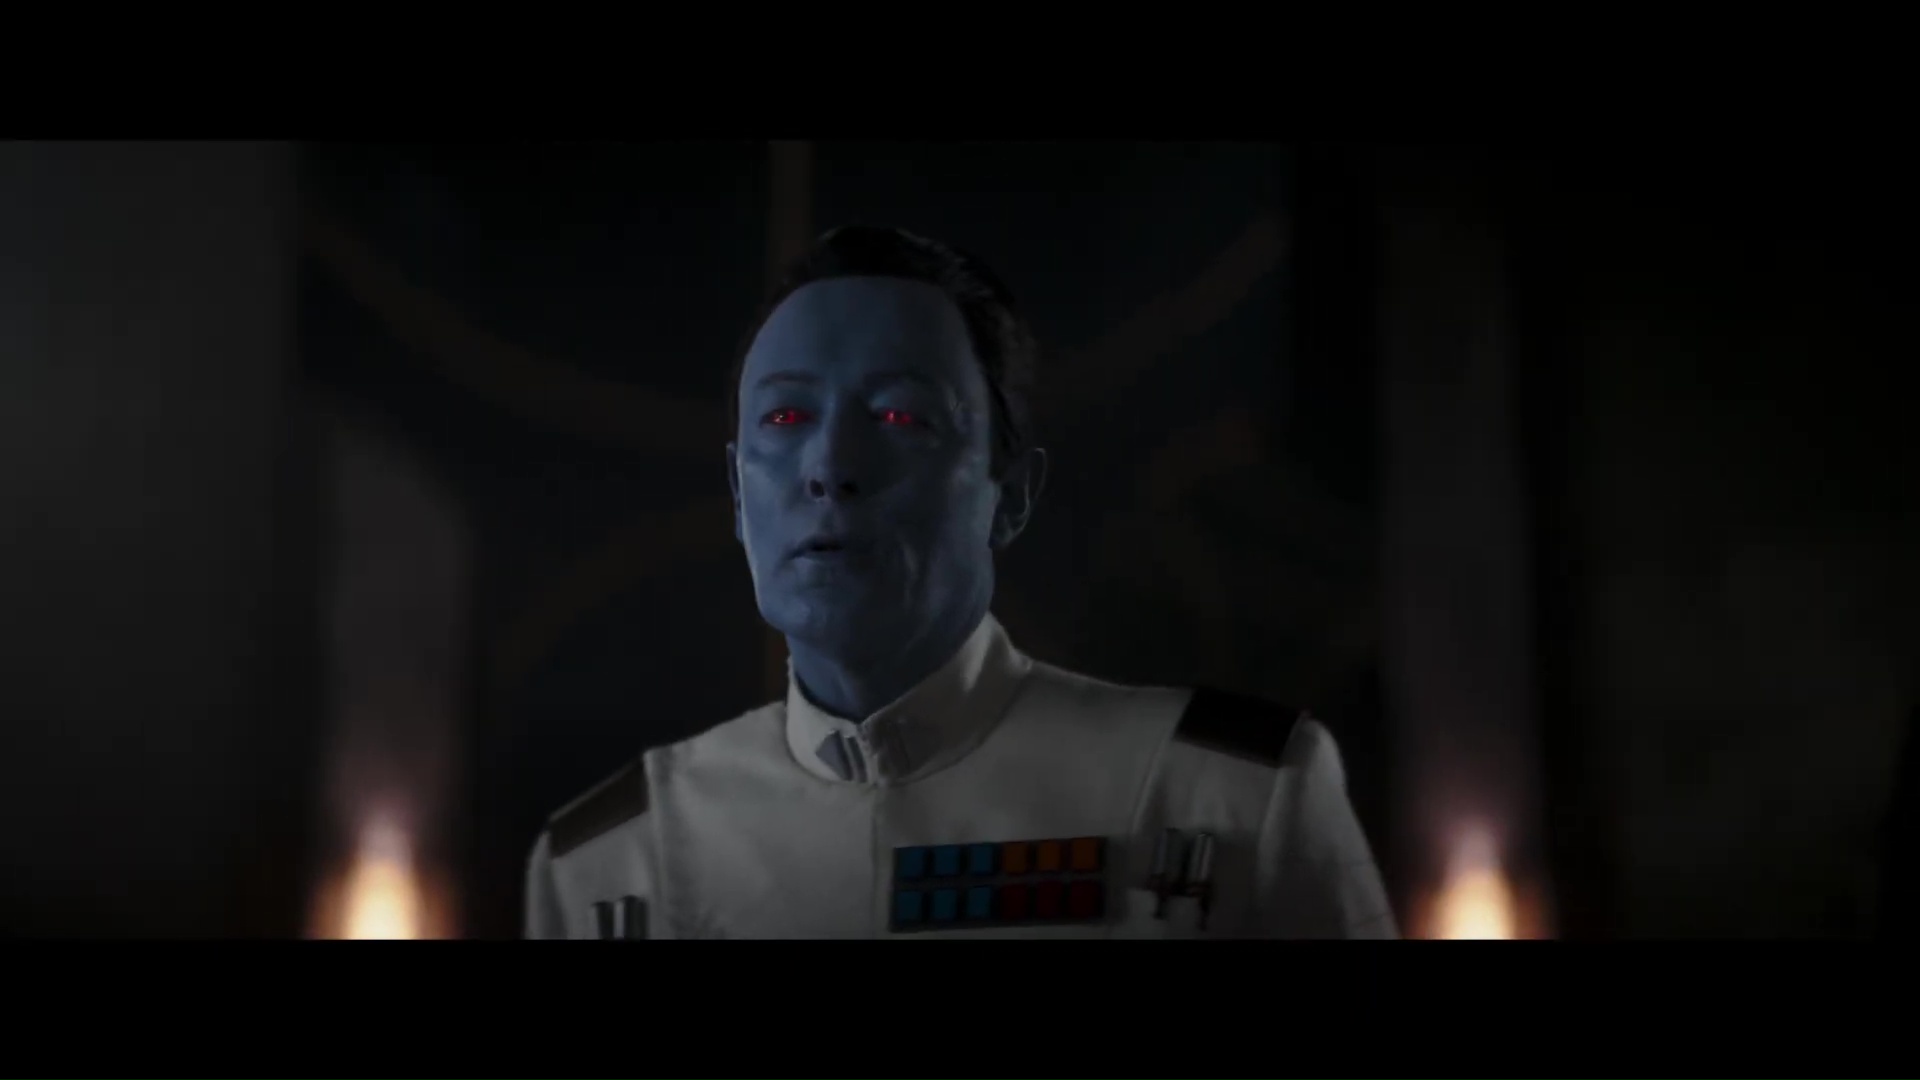 Our first close-up of Lars Mikkelsen in live action as the blue-skinned, red-eyed Chiss alien Thrawn in a trailer for the Disney Plus series Ahsoka